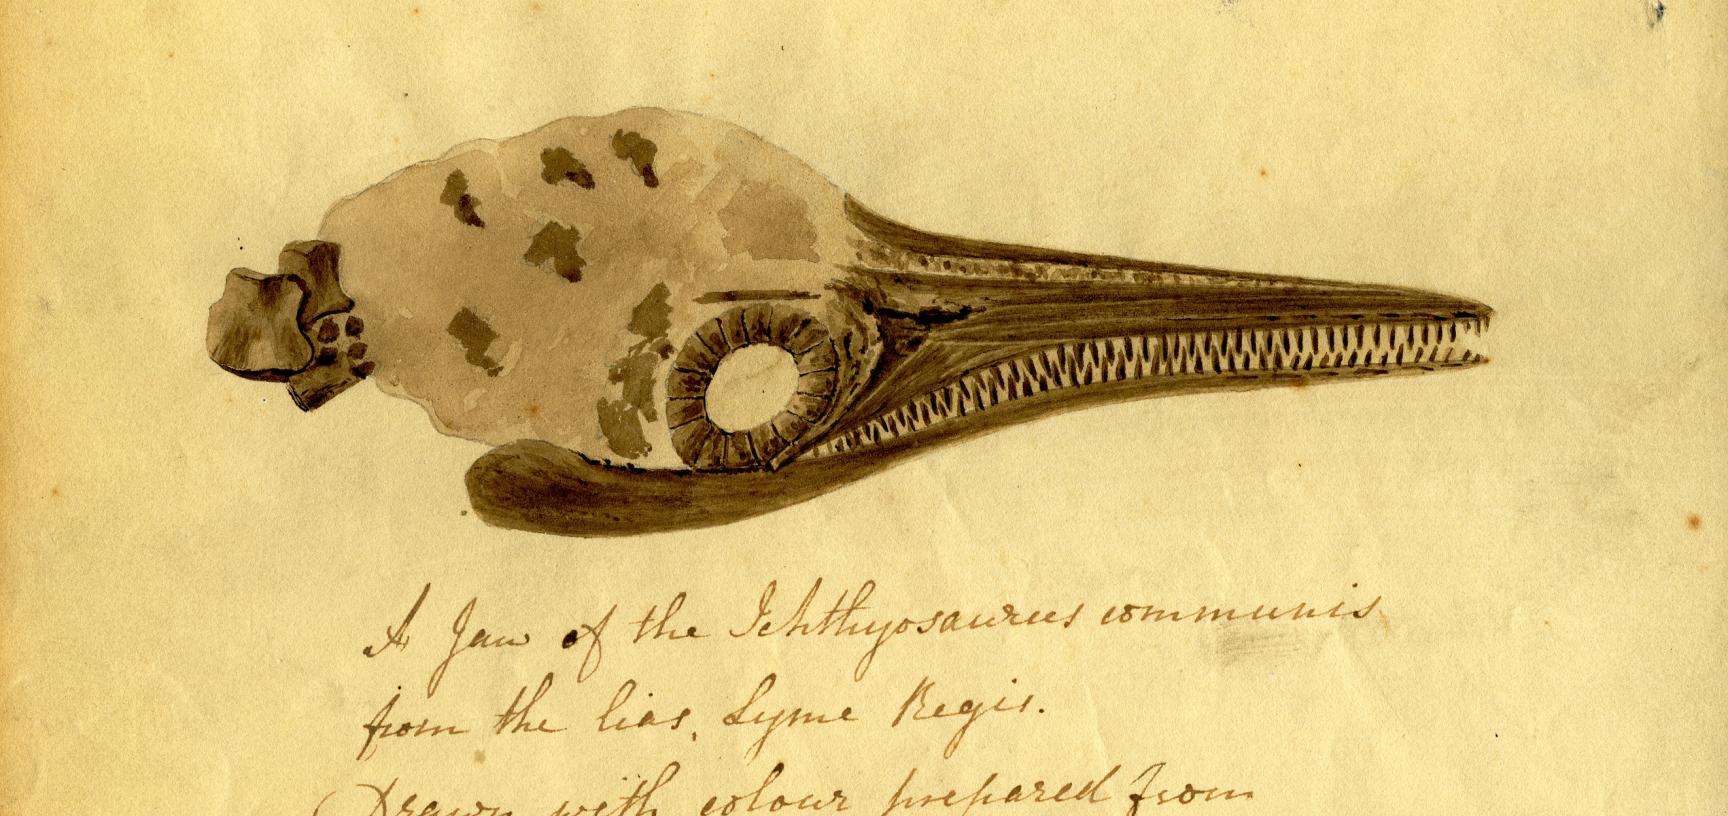 A letter from the palaeontologist Elizabeth Philpot to Mary Buckland, dated 9 December 1833, containing a sketch of an ichthyosaur skull painted in ink from a fossil squid of the same age as the ichthyosaur.